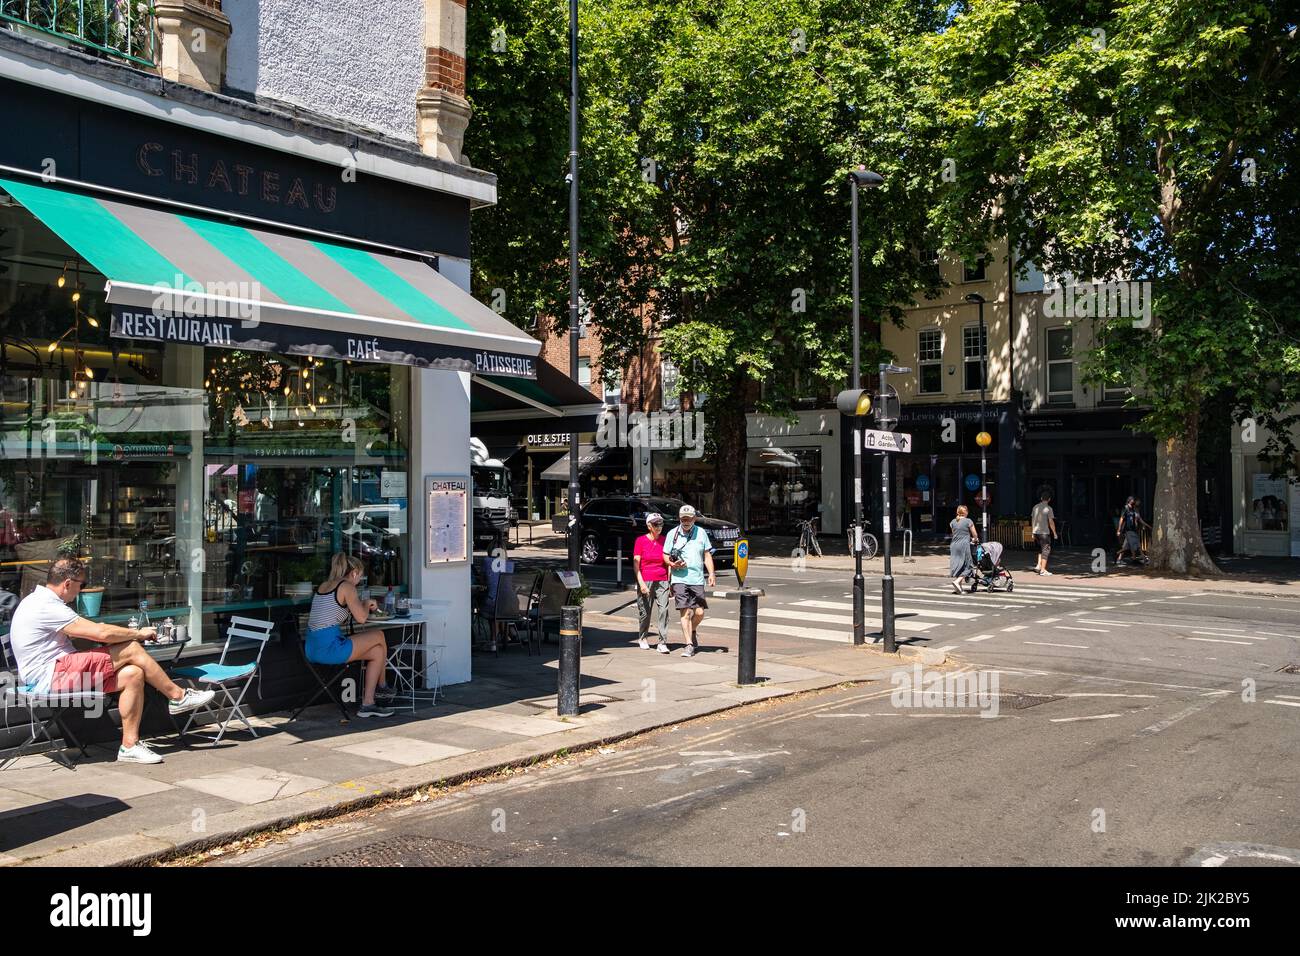 London- July 2022: Chiswick High Road summer scene, a long street of attractive high street shops in an aspirational area of West London Stock Photo